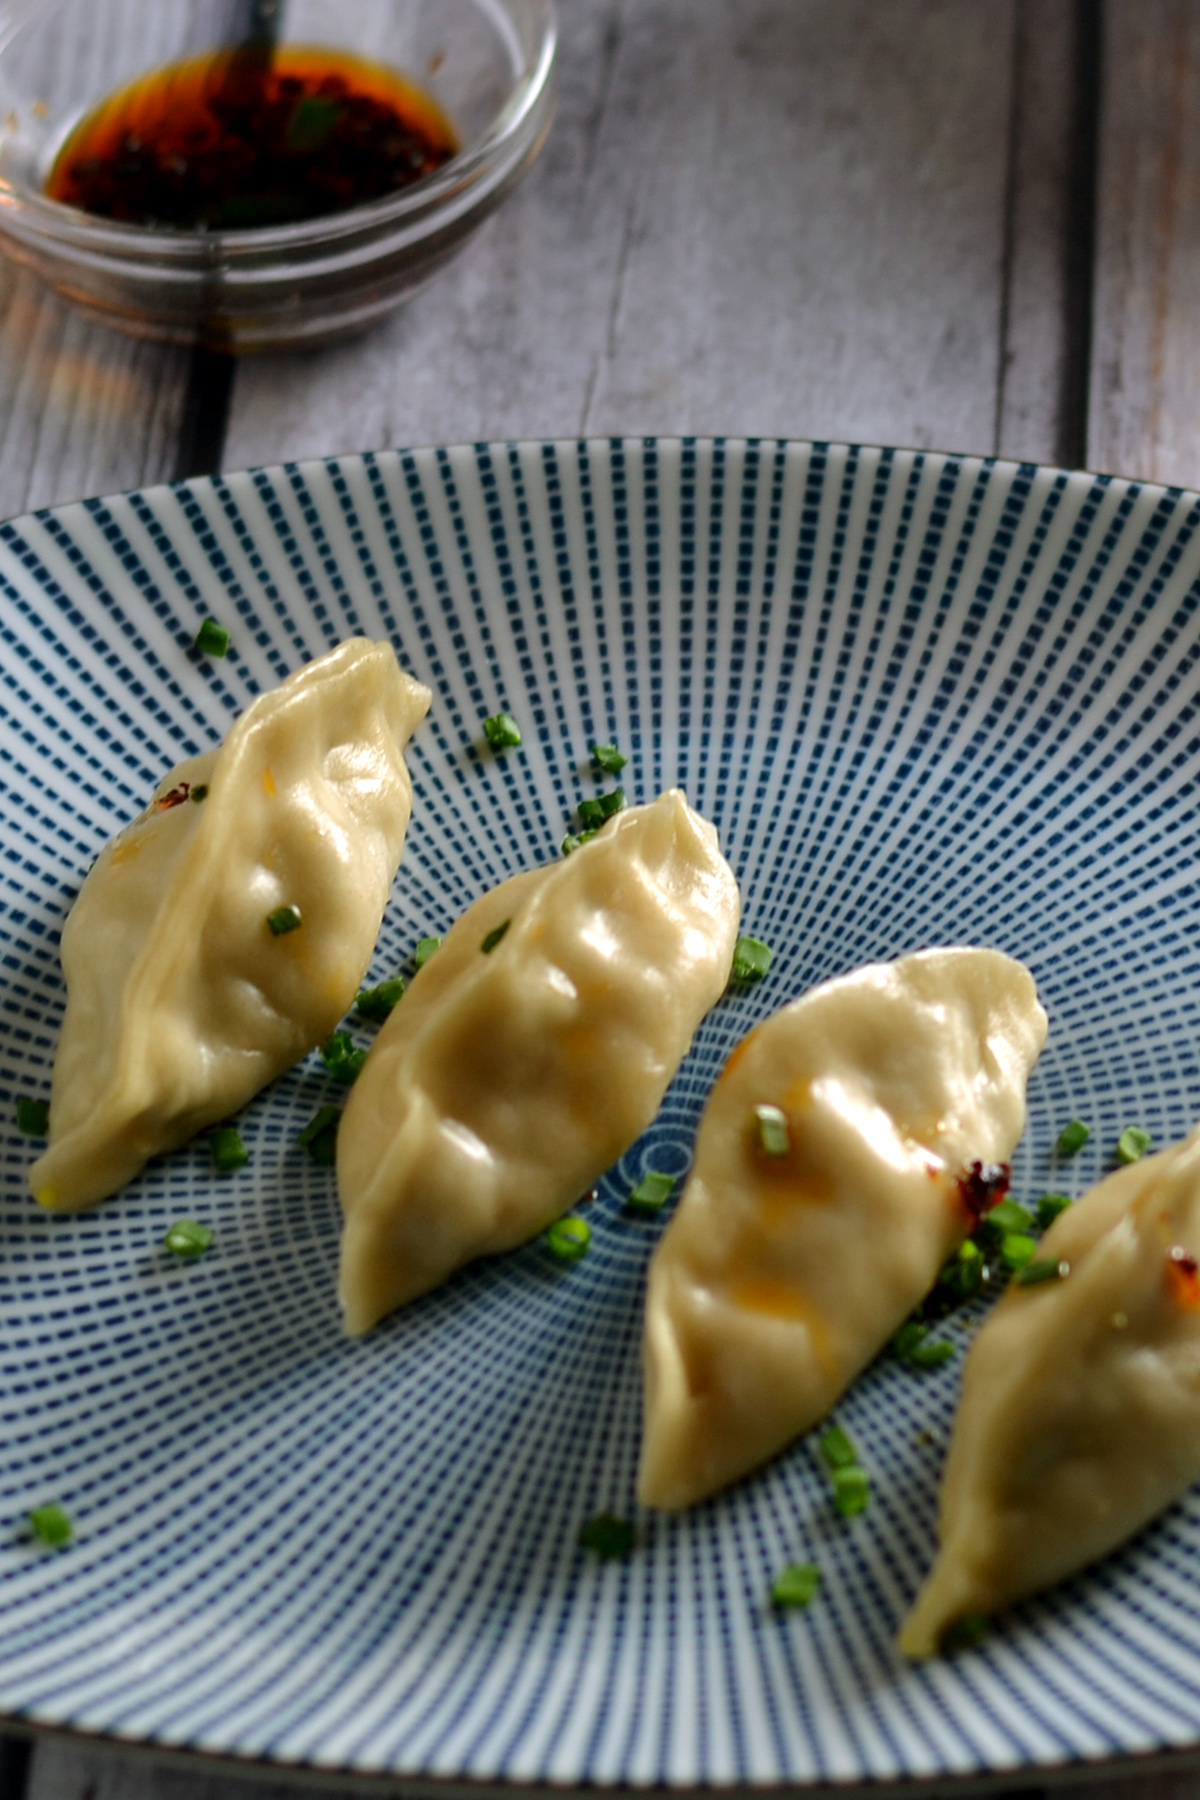 Homemade Dumplings with Chili Oil |  NY Food Journal